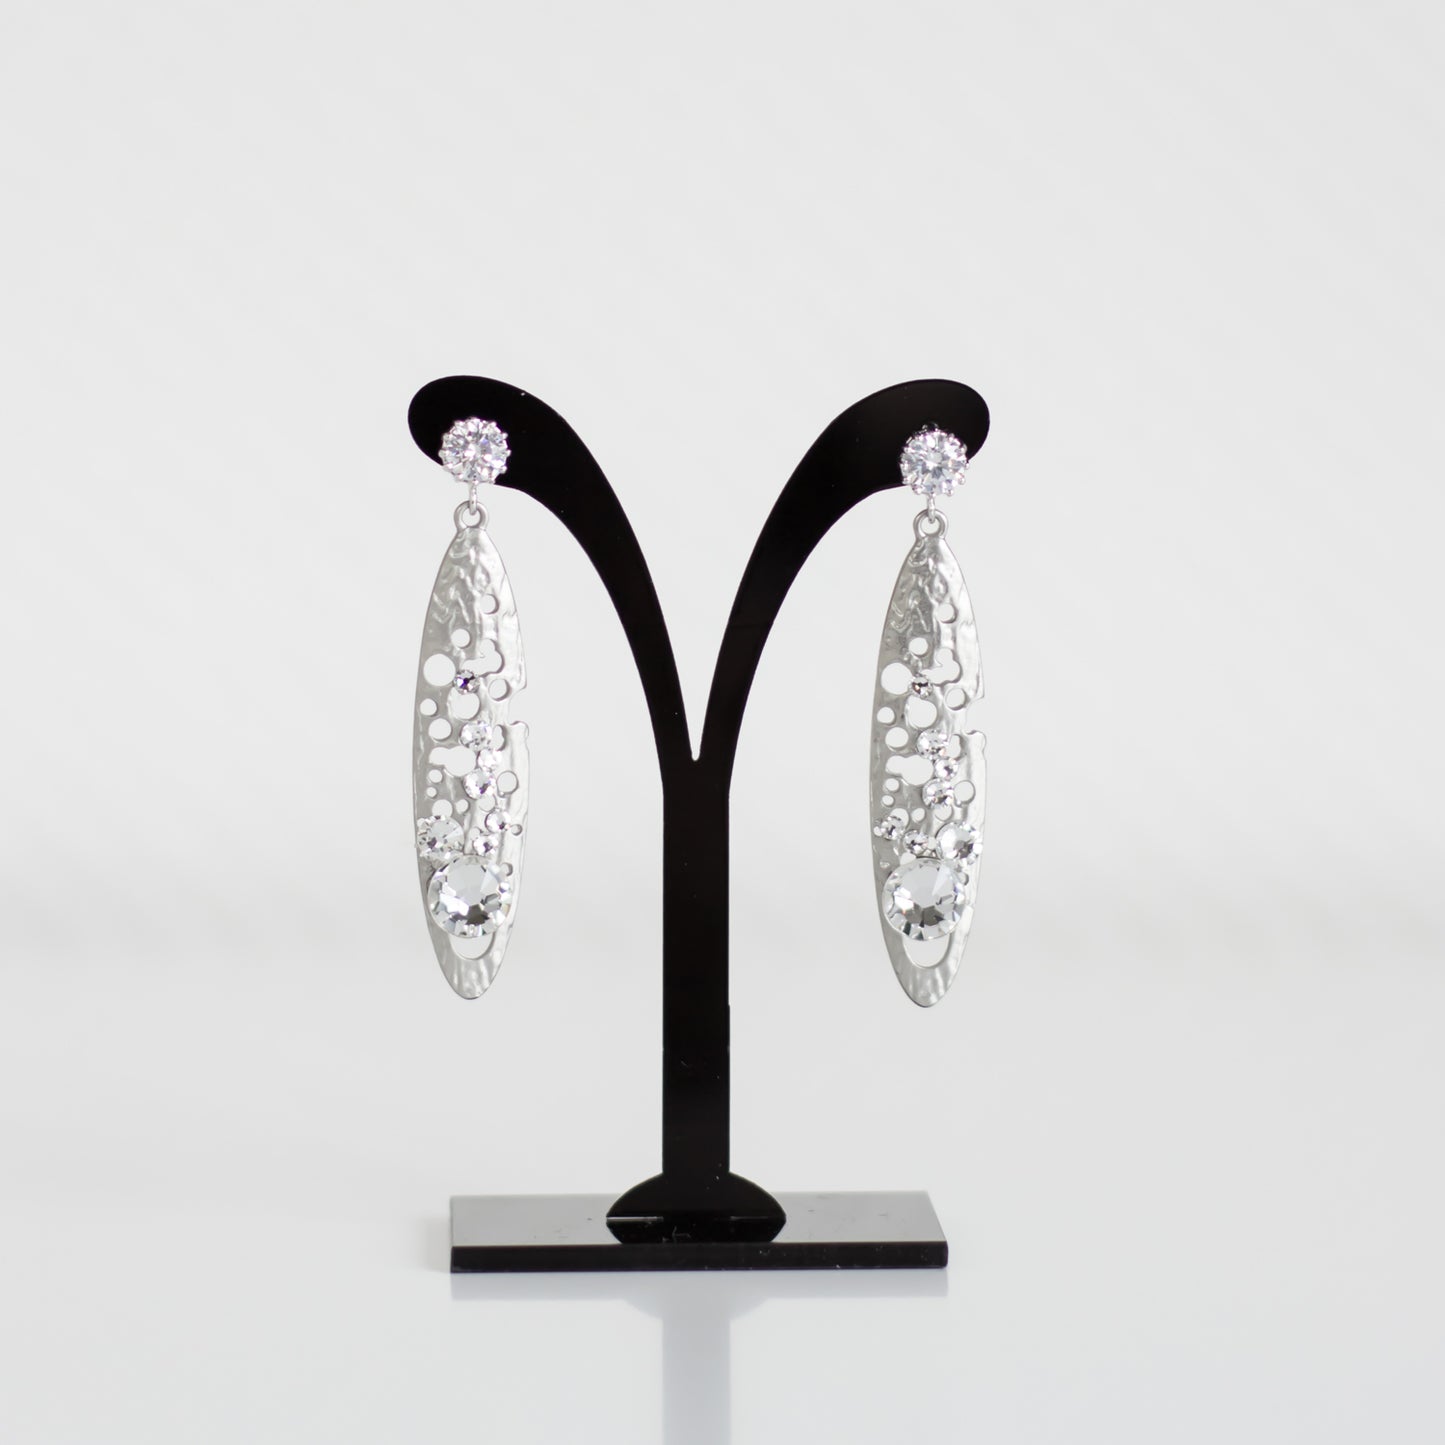 Shop handmade silver-plated dangle & drop earrings with cubic zirconia stud and oblong filigree crystal accents.